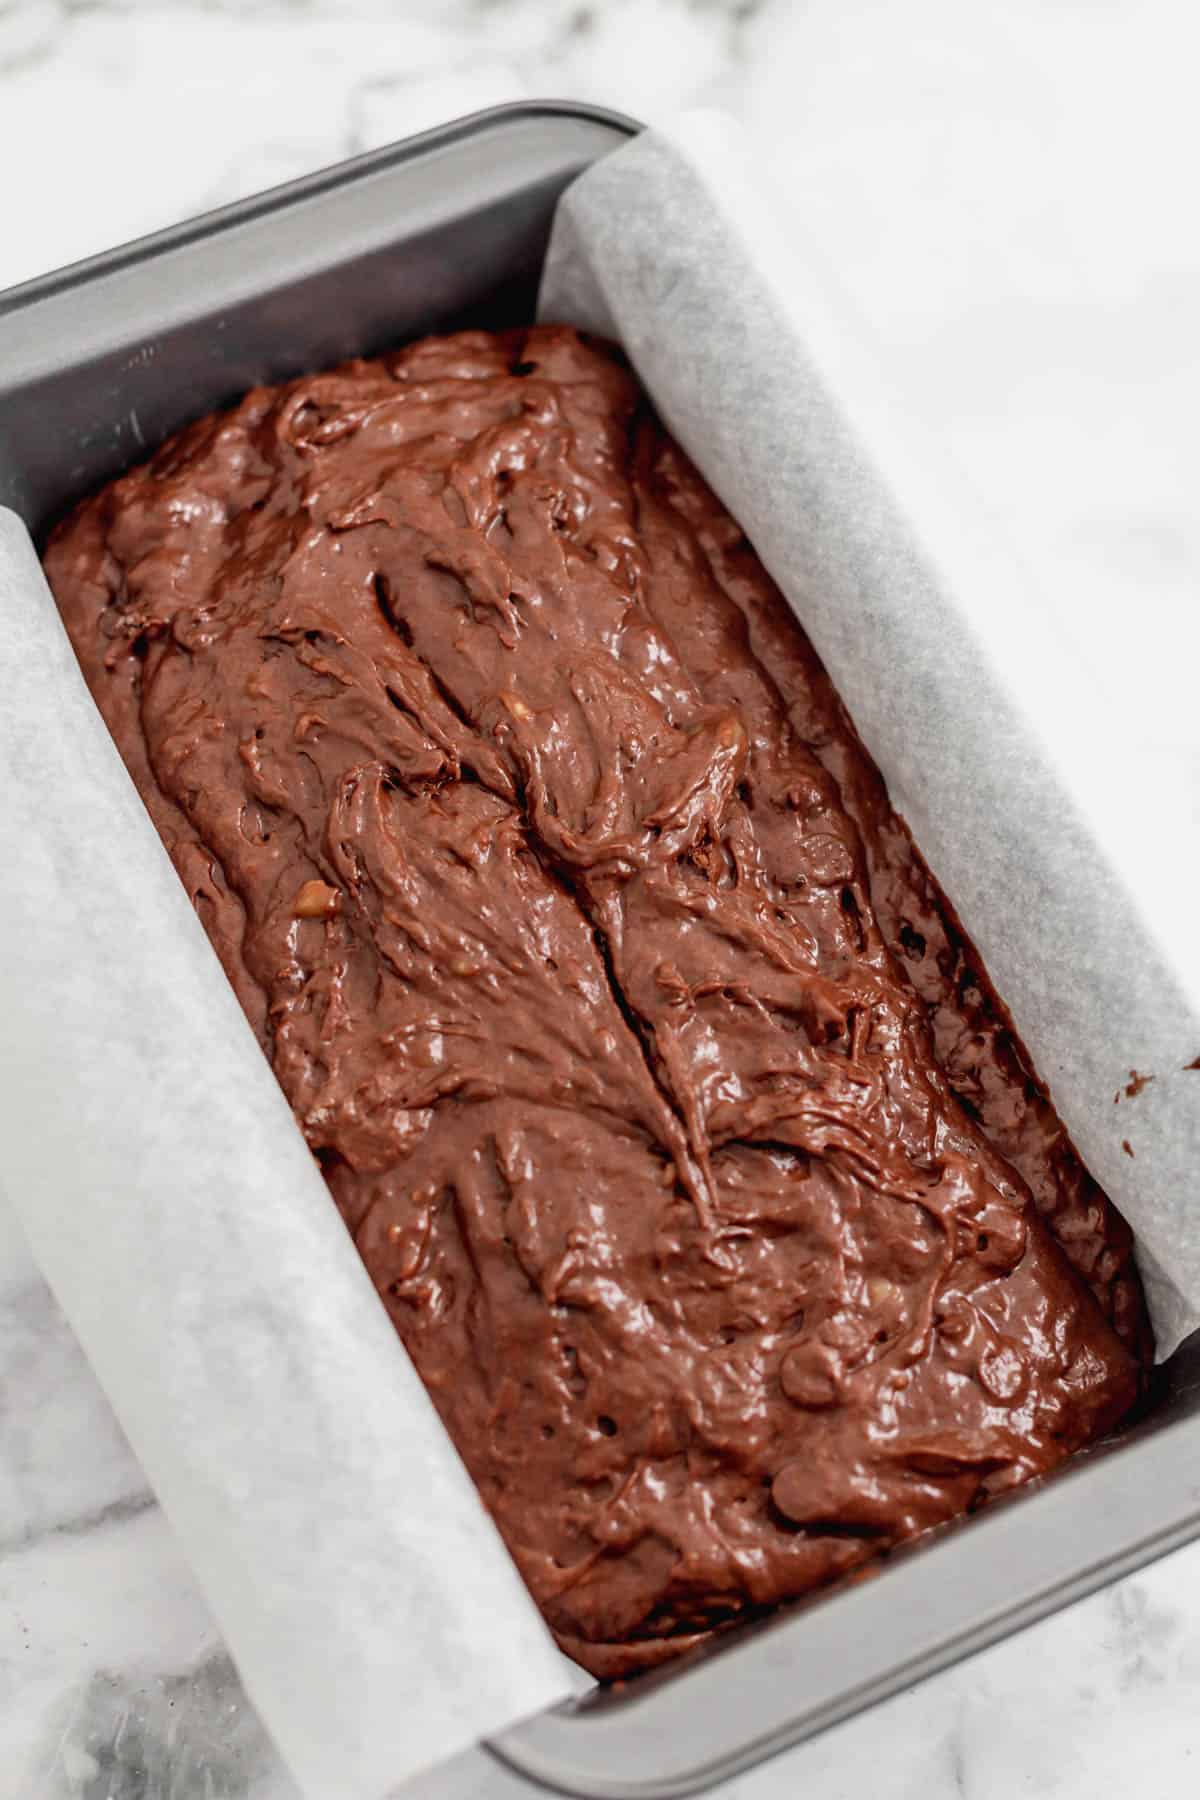 Chocolate banana bread batter in a bread pan lined with parchment paper.